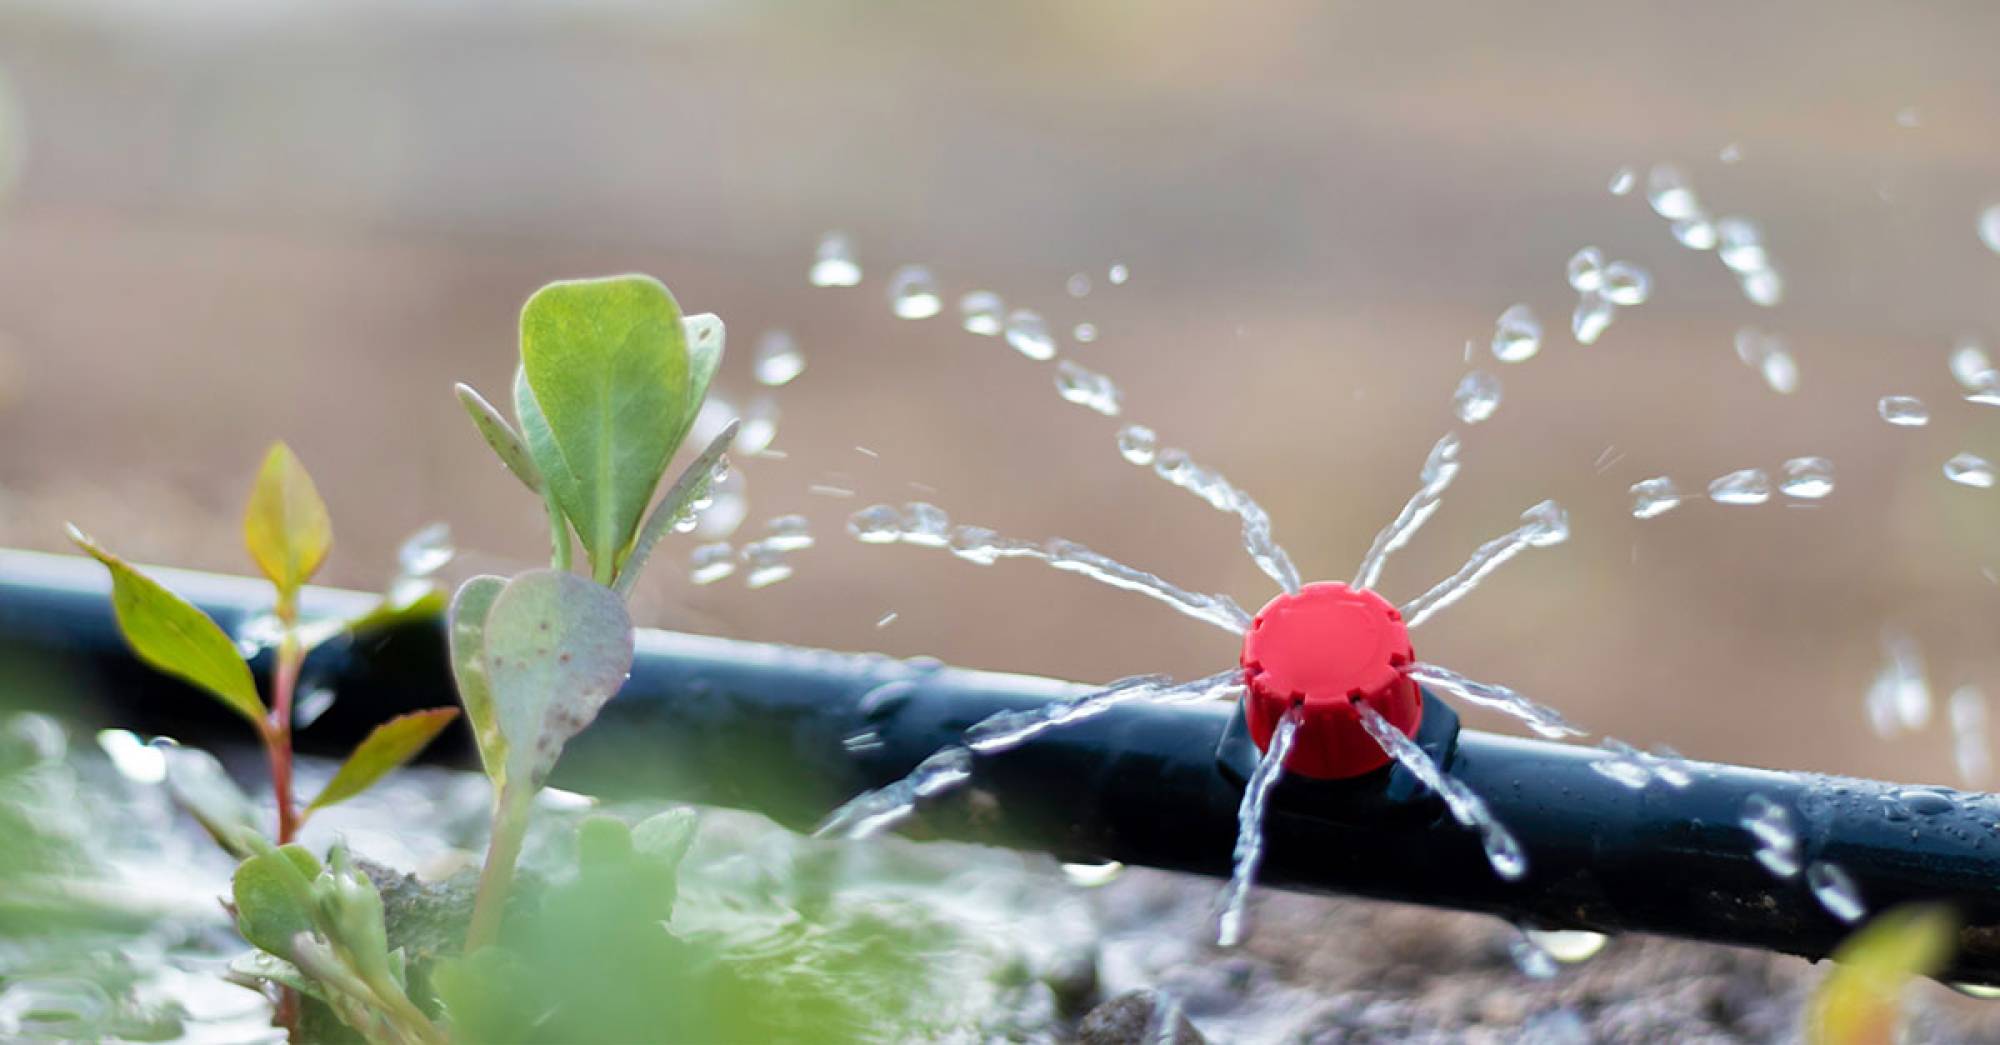 irrigation-system-blog-header.jpg
What is an irrigation system? Waterscapes explains its use